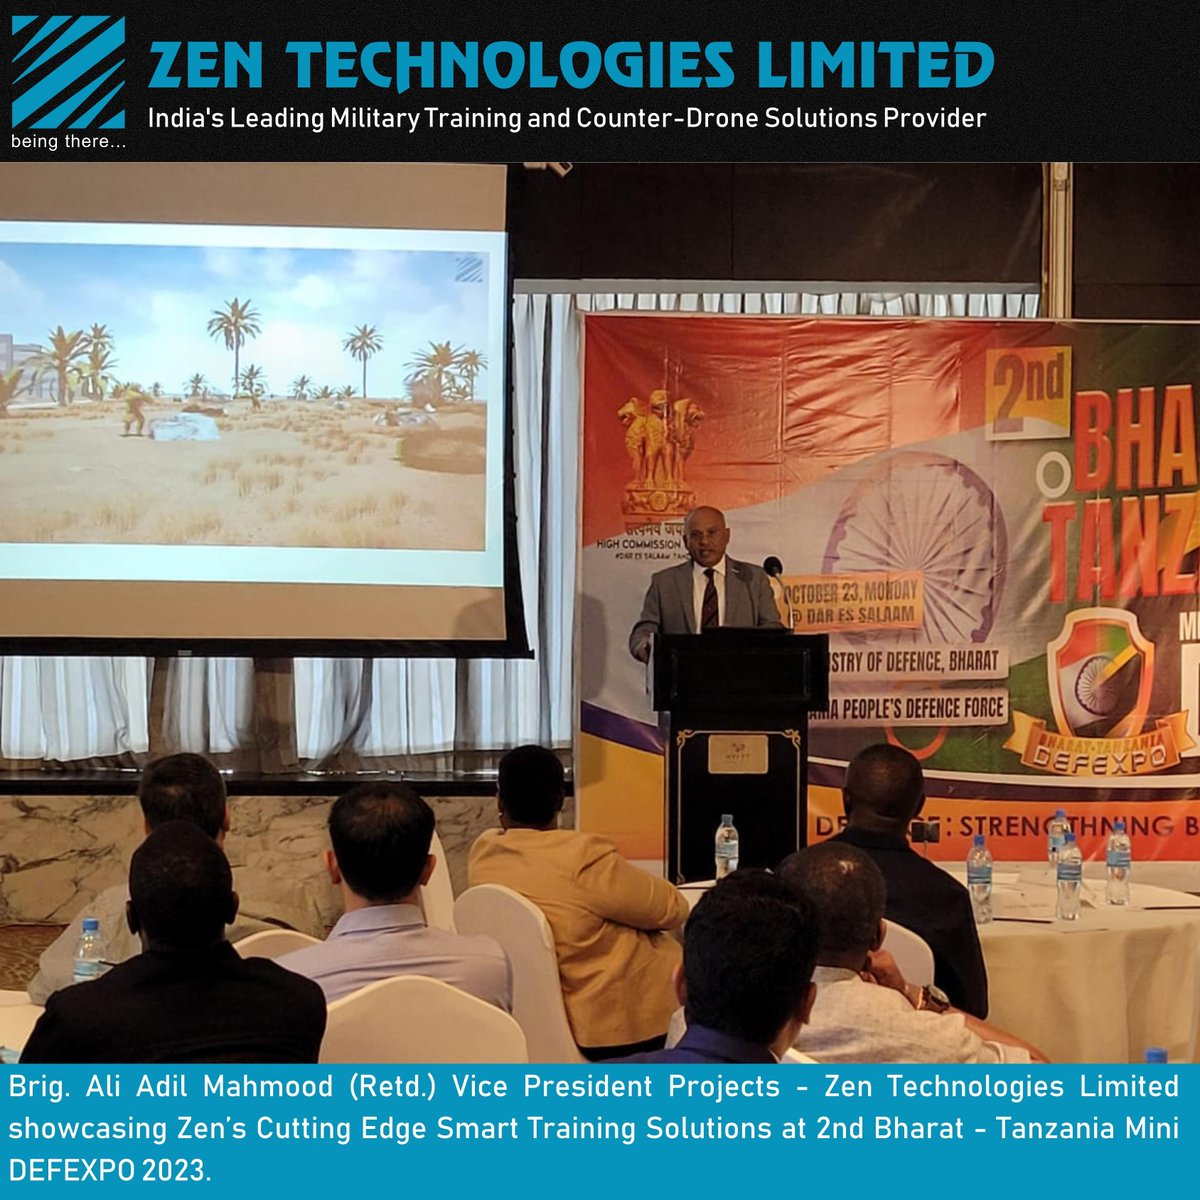 🛡️@Zentechnologies honored to unveil its state-of-the-art Smart Training Solutions at the 2nd Bharat-Tanzania Mini DEFEXPO 2023 in Dar es Salaam, Tanzania.🇮🇳🇹🇿 Strengthening defence capabilities through cutting-edge technology. #BeingThere  #SmartTraining #DefenceInnovation